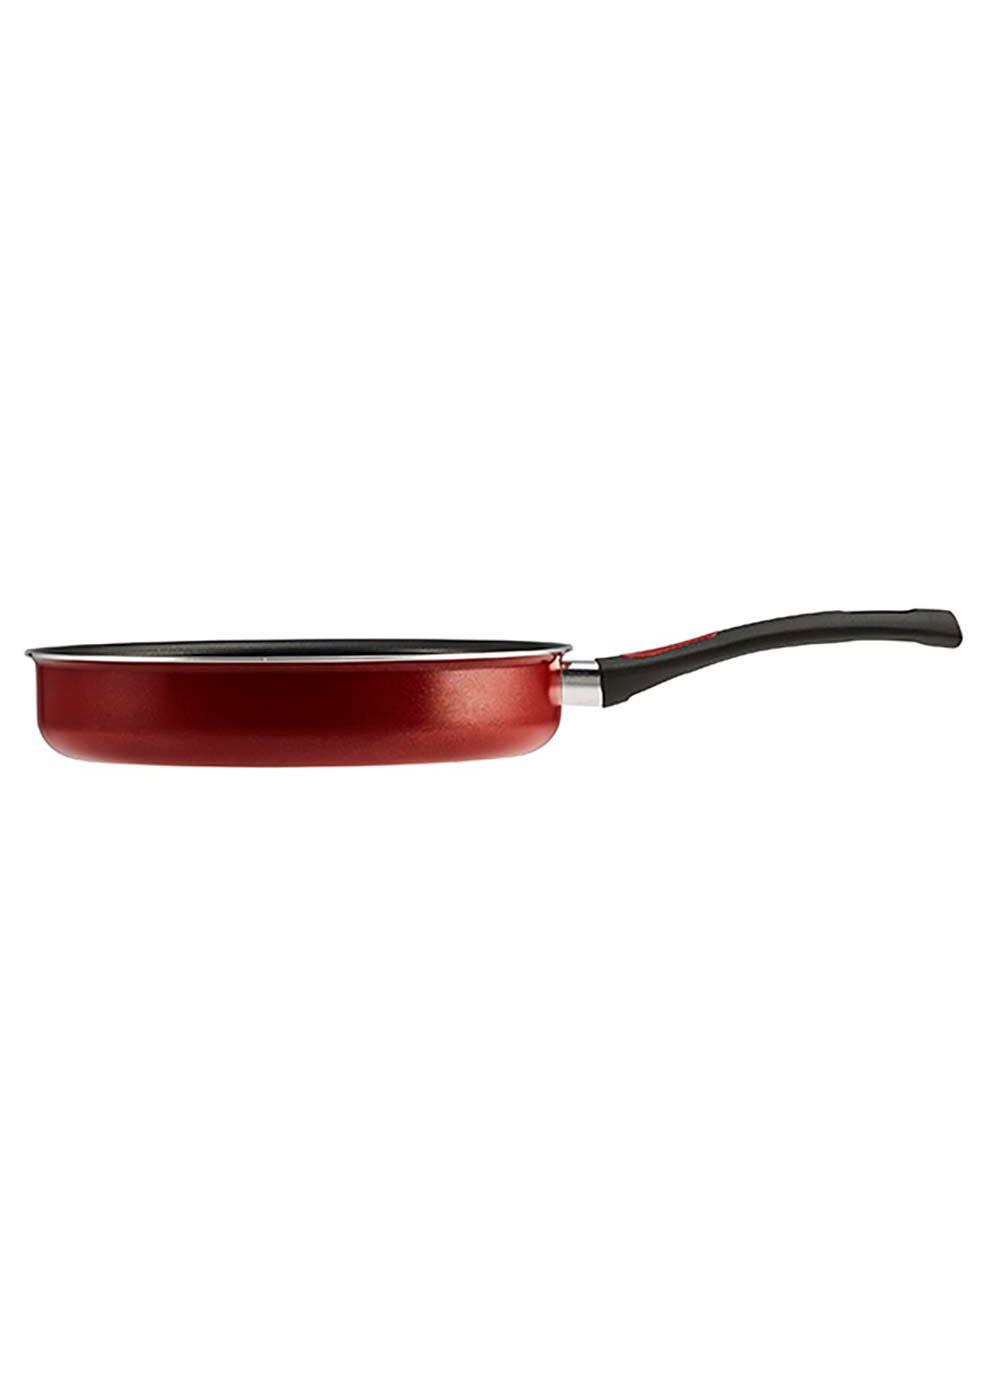 Tramontina Non-Stick Red Cookware Set; image 2 of 14